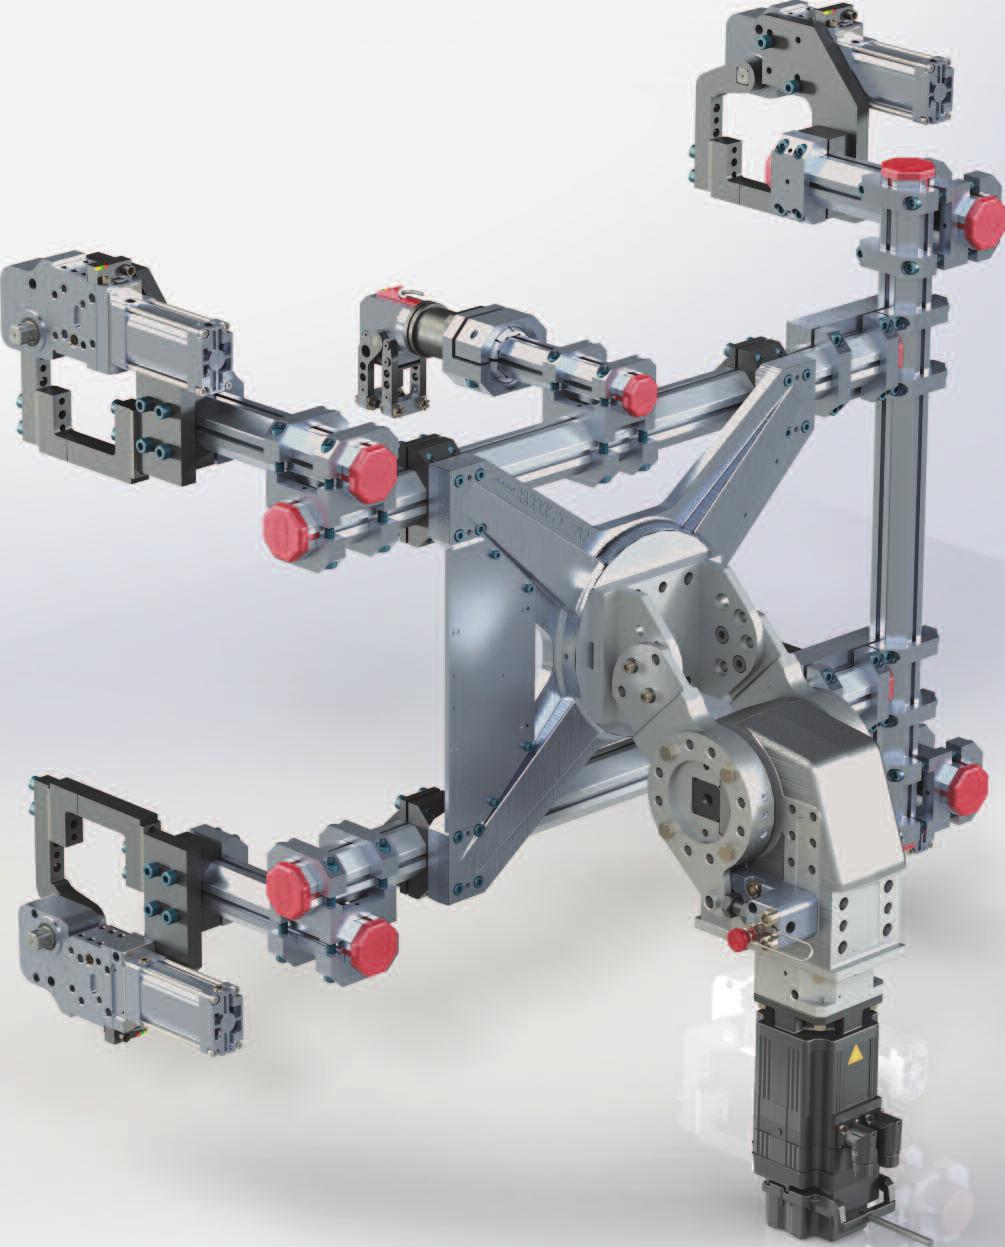 4 82M-3E Series Enclosed Power Clamps Material Handling Clamping Solutions DE-STA-CO's pneumatic power clamps and grippers range from heavy-duty enclosed clamps for welding environments to compact